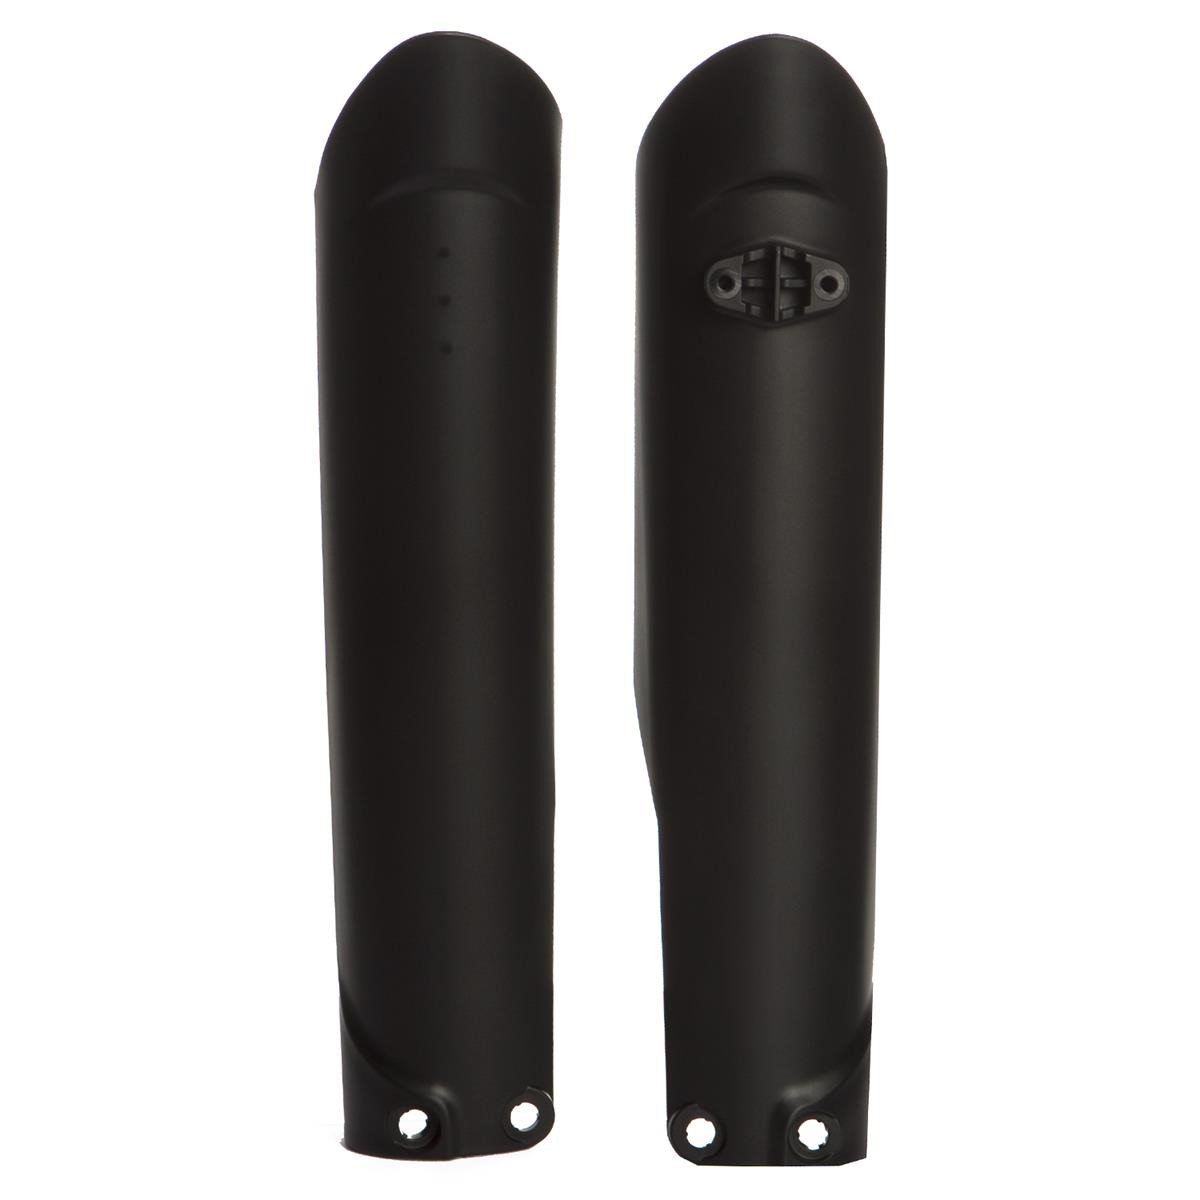 Acerbis Lower Fork Covers  KTM SX/SX-F/EXC/EXC-F 16-, Husqvarna TC/FC/TE/FE 16-, Gas Gas MC/MC-F/EC/EC-F, Black